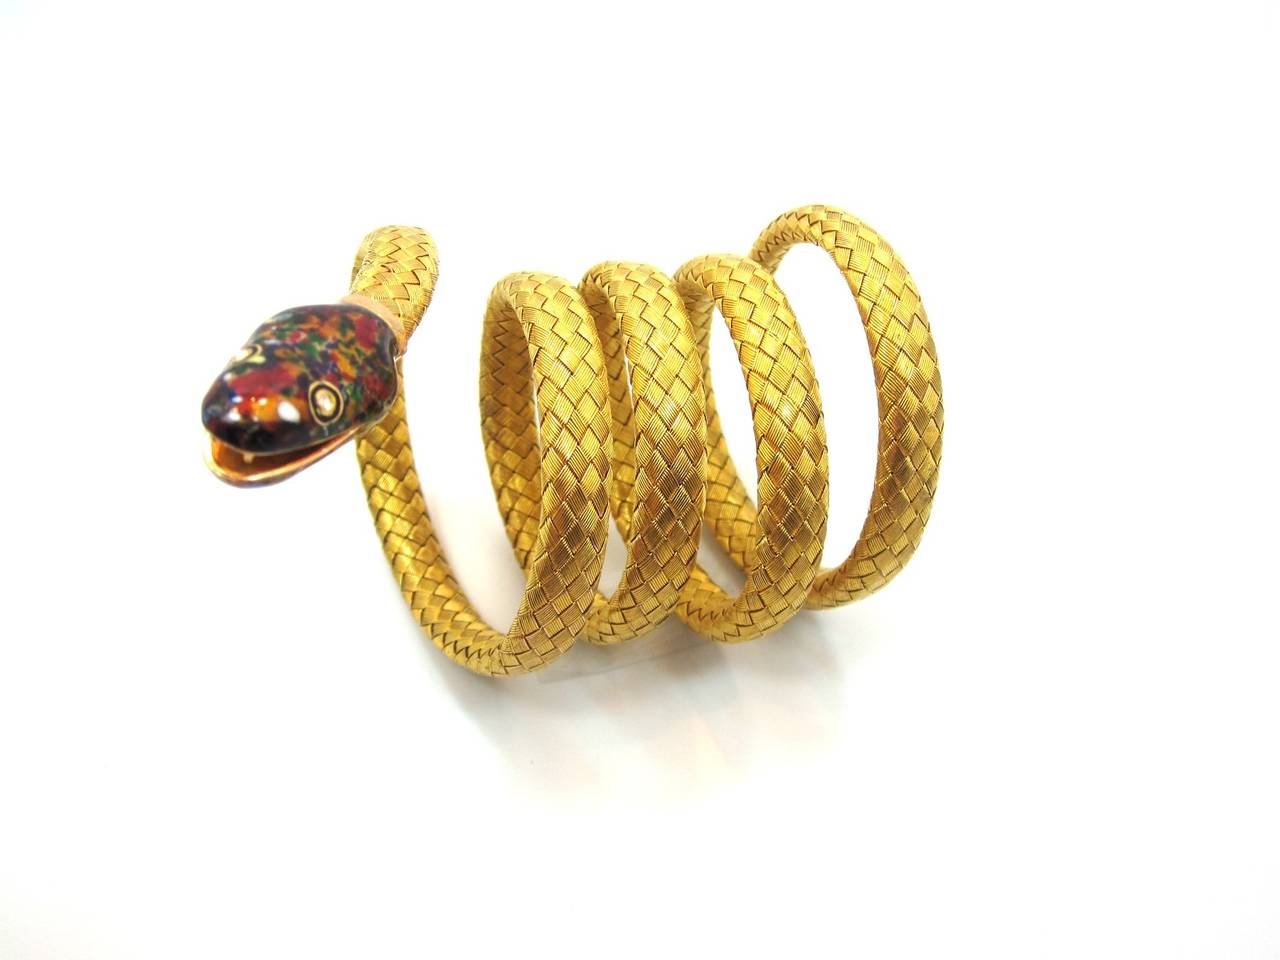 Superb example of Victorian craftsmanship. Handcrafted in a 18 karat yellow woven design. The coiled snake is flexible allowing you to wrap the bracelet around your wrist. The snake head is beautifully decorated with multi colored enamel and the